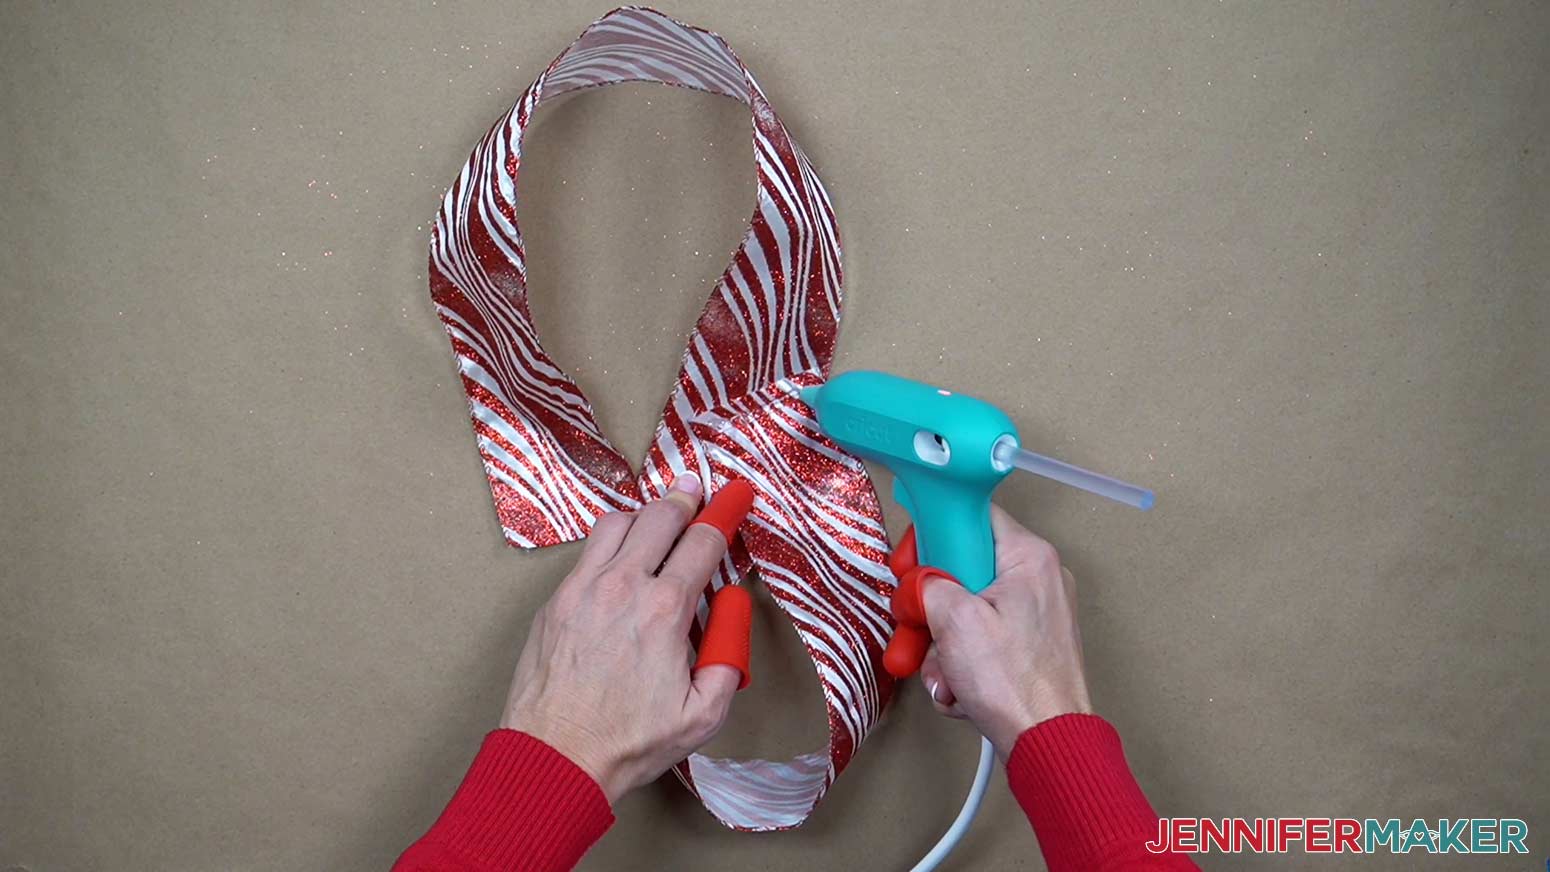 Use hot glue to connect the ends of the ribbon.